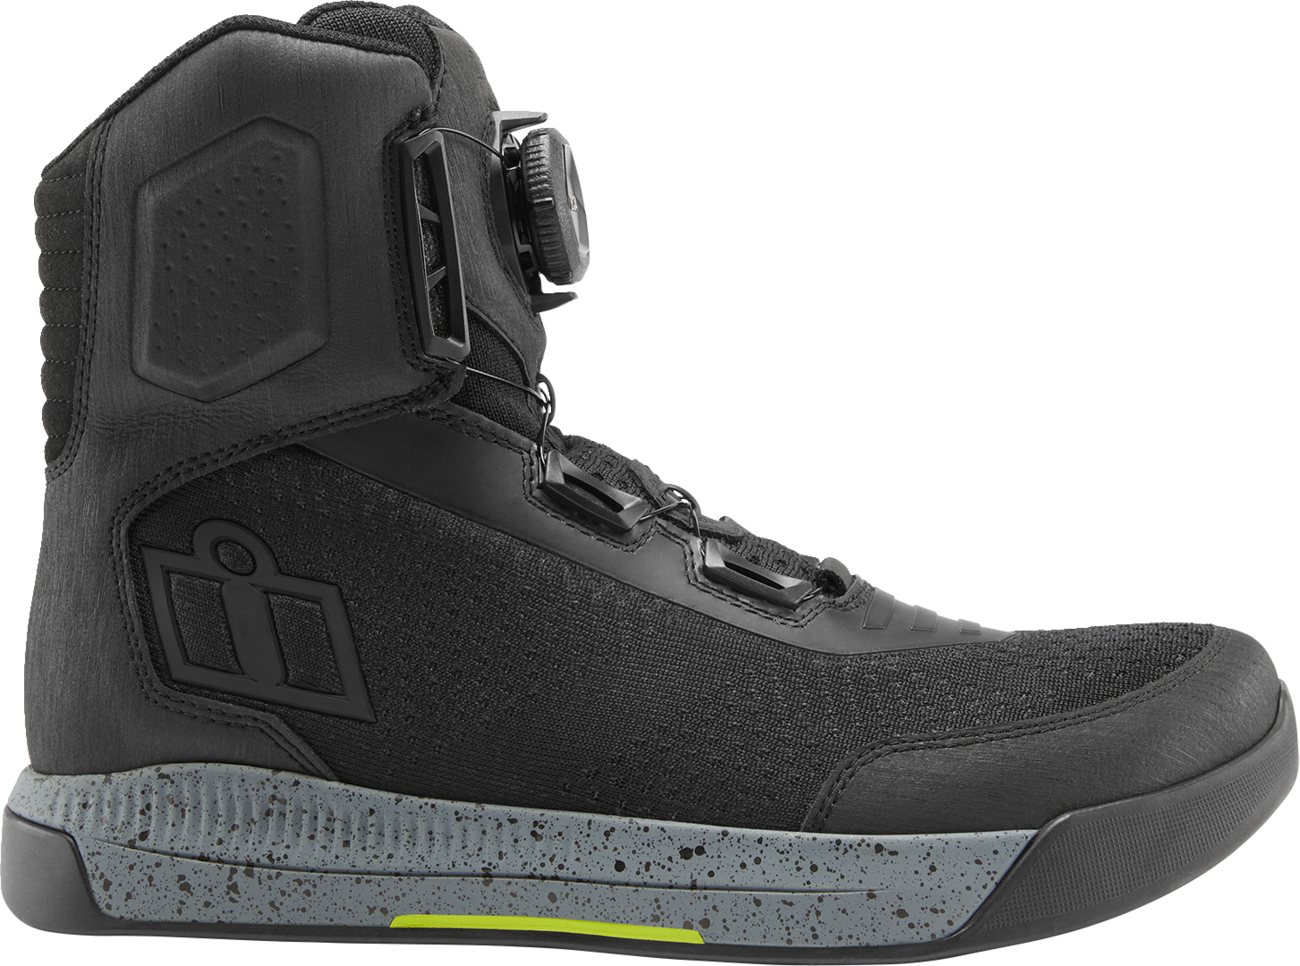 ICON Overlord™ Vented CE Boots - Black - Size 8.5 3403-1258